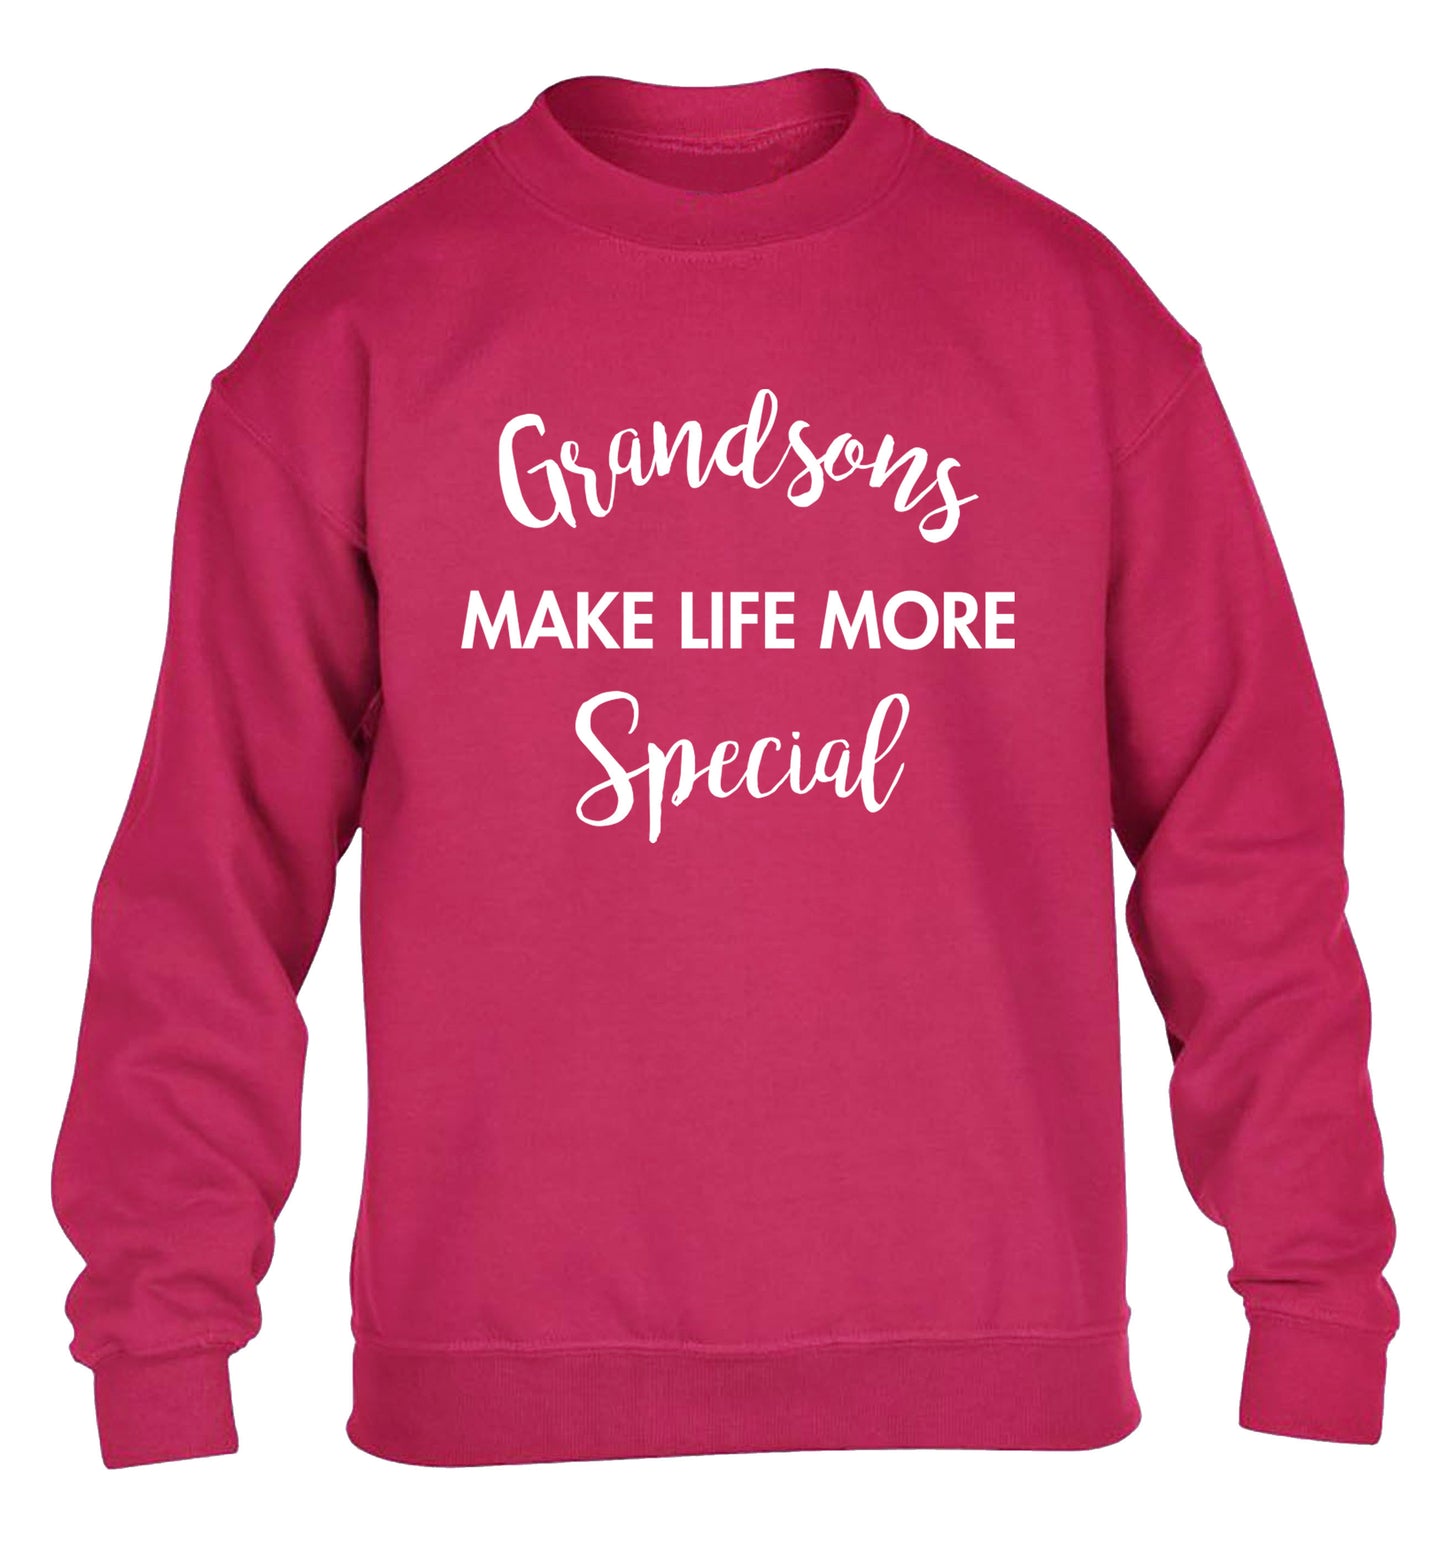 Grandsons make life more special children's pink sweater 12-14 Years